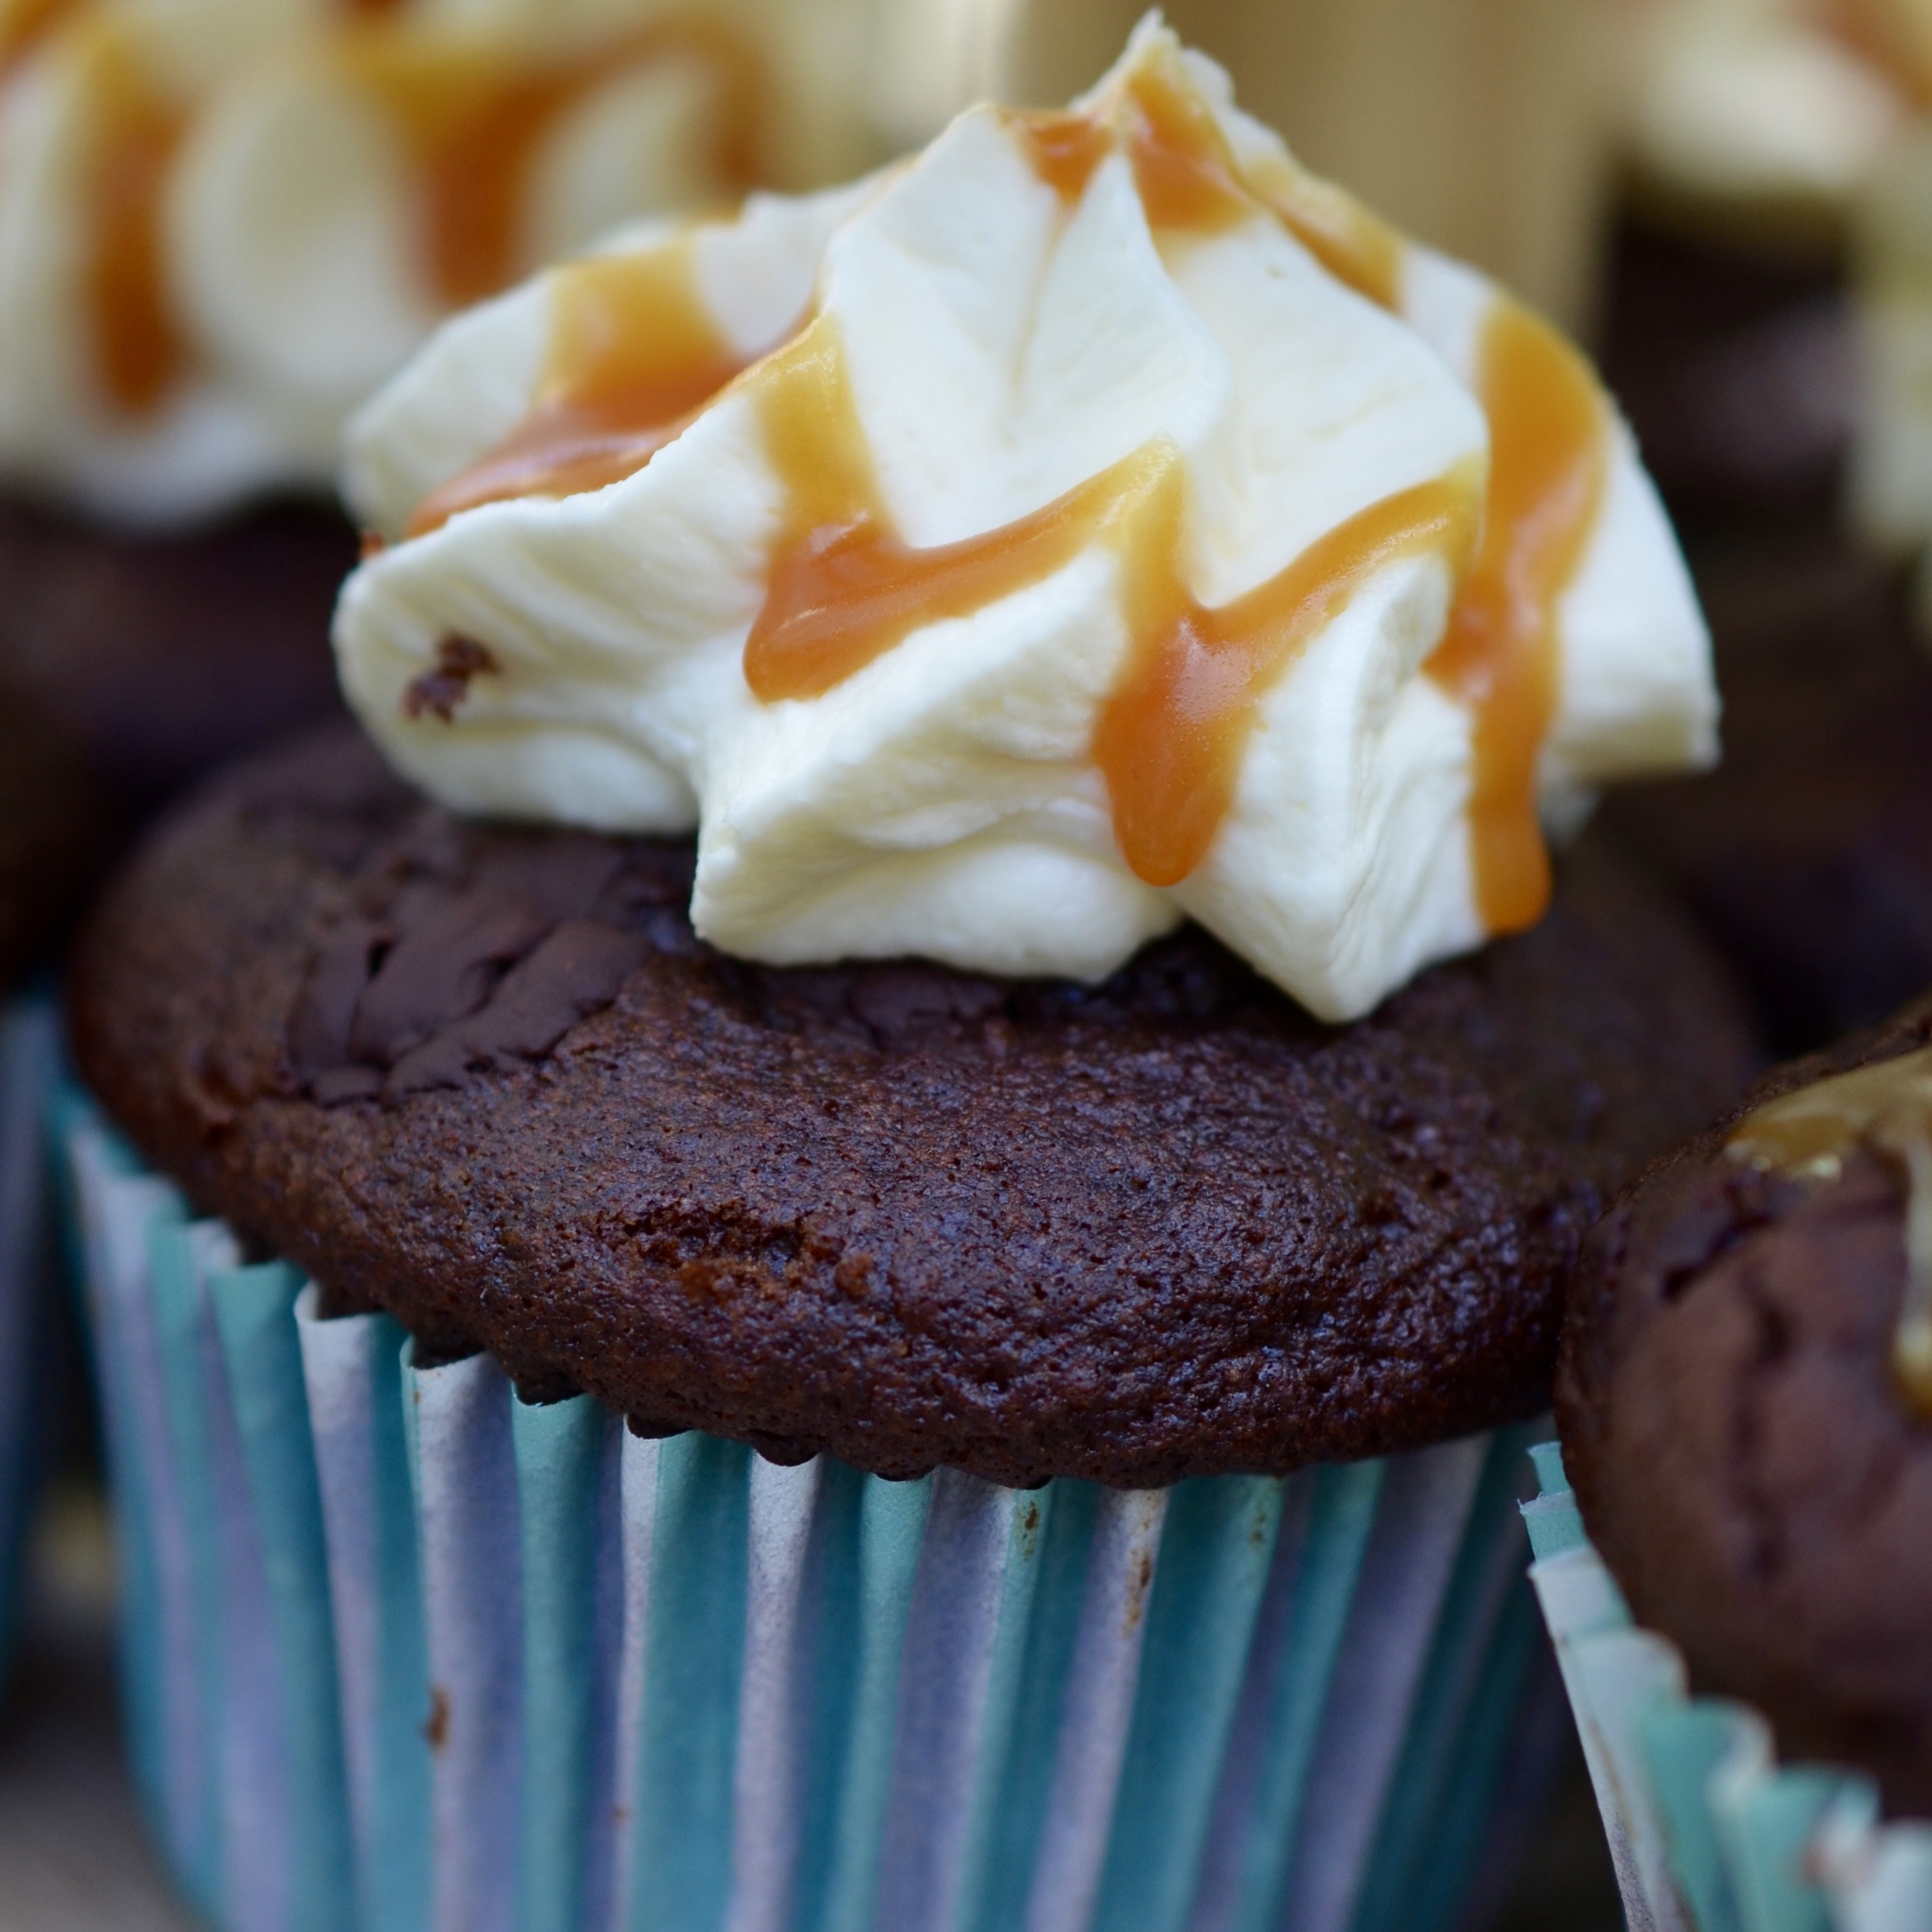 Hibiscus Dinners dessert: Double chocolate and banana cupcakes with mascarpone topping and rum caramel